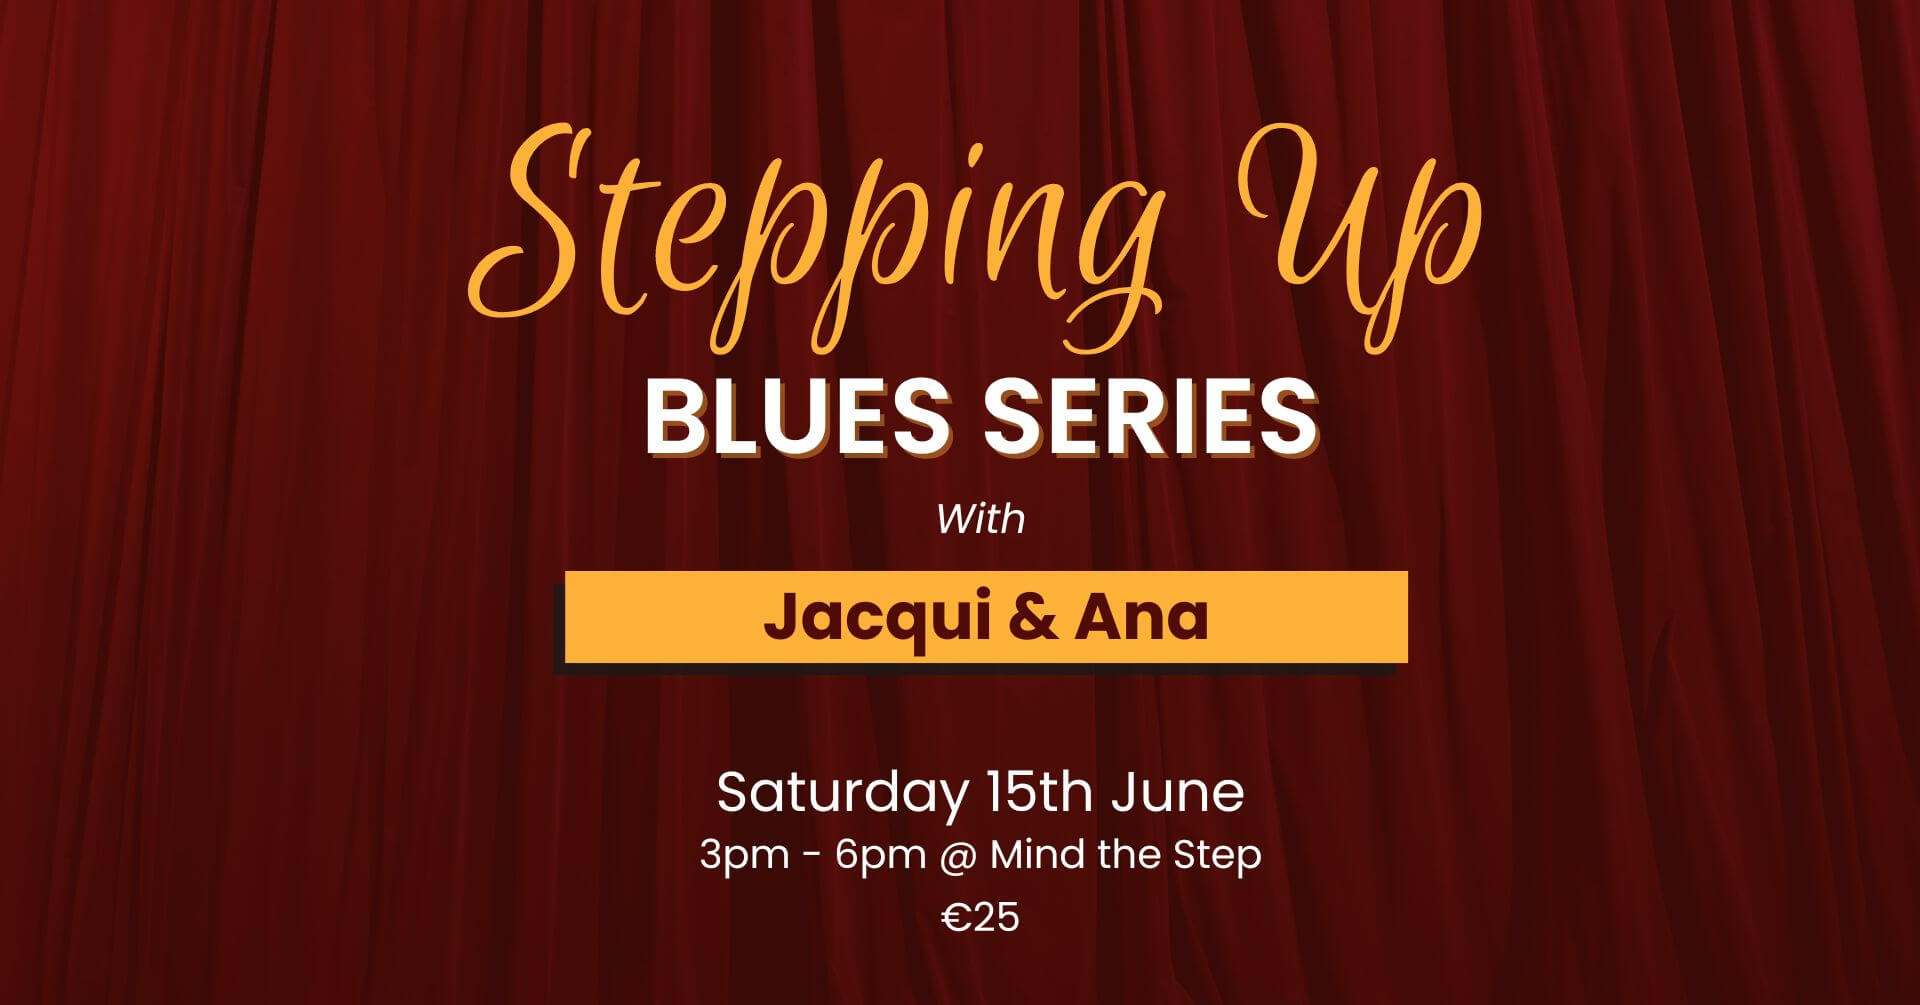 Stepping Up Blues Series with Jacqui & Ana